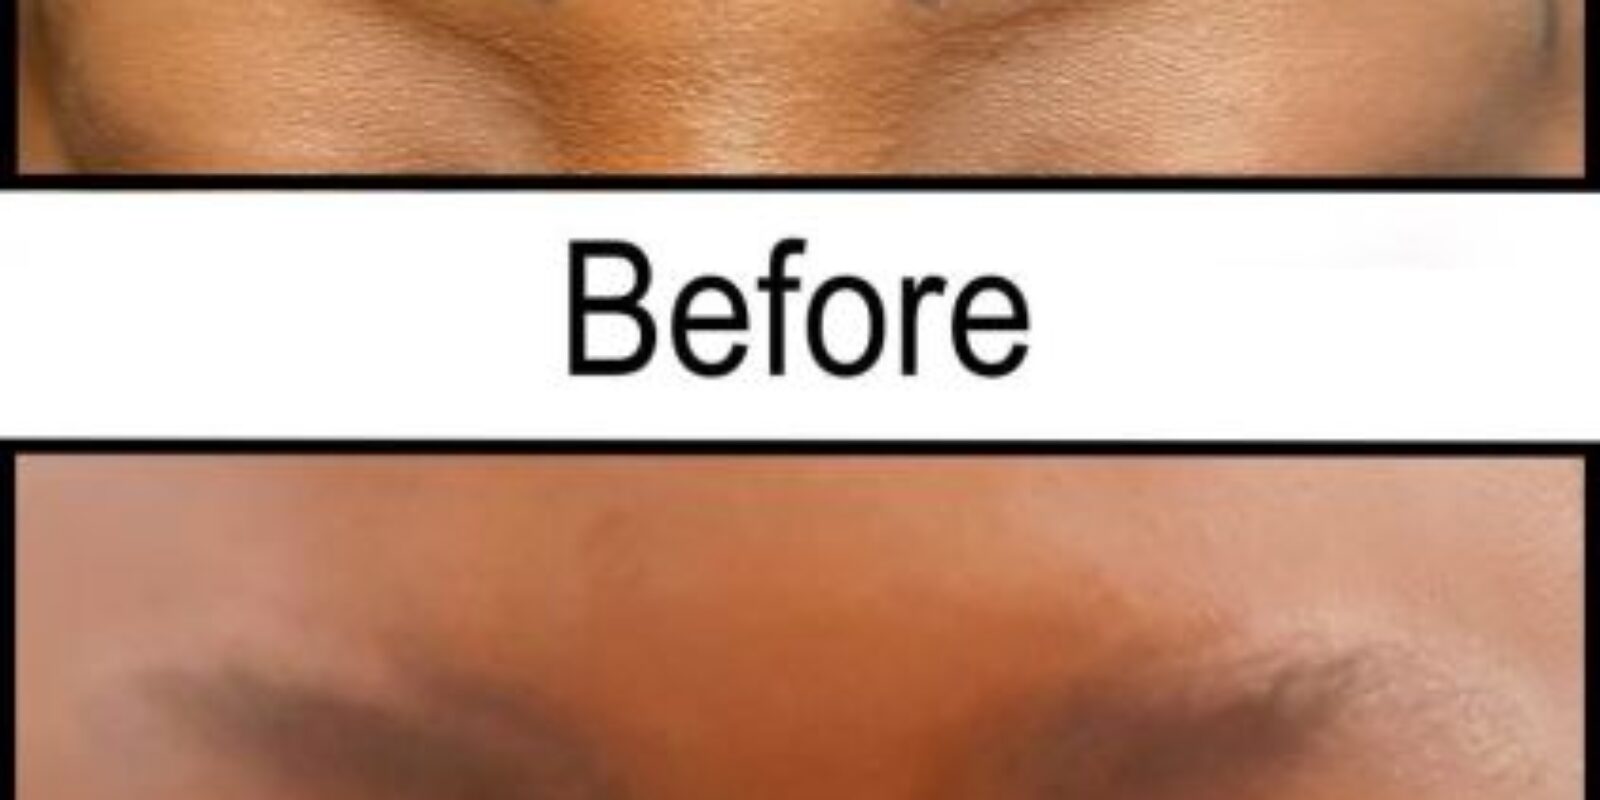 Tips to Remove Eyebrow Tattoos Safely and Effectively